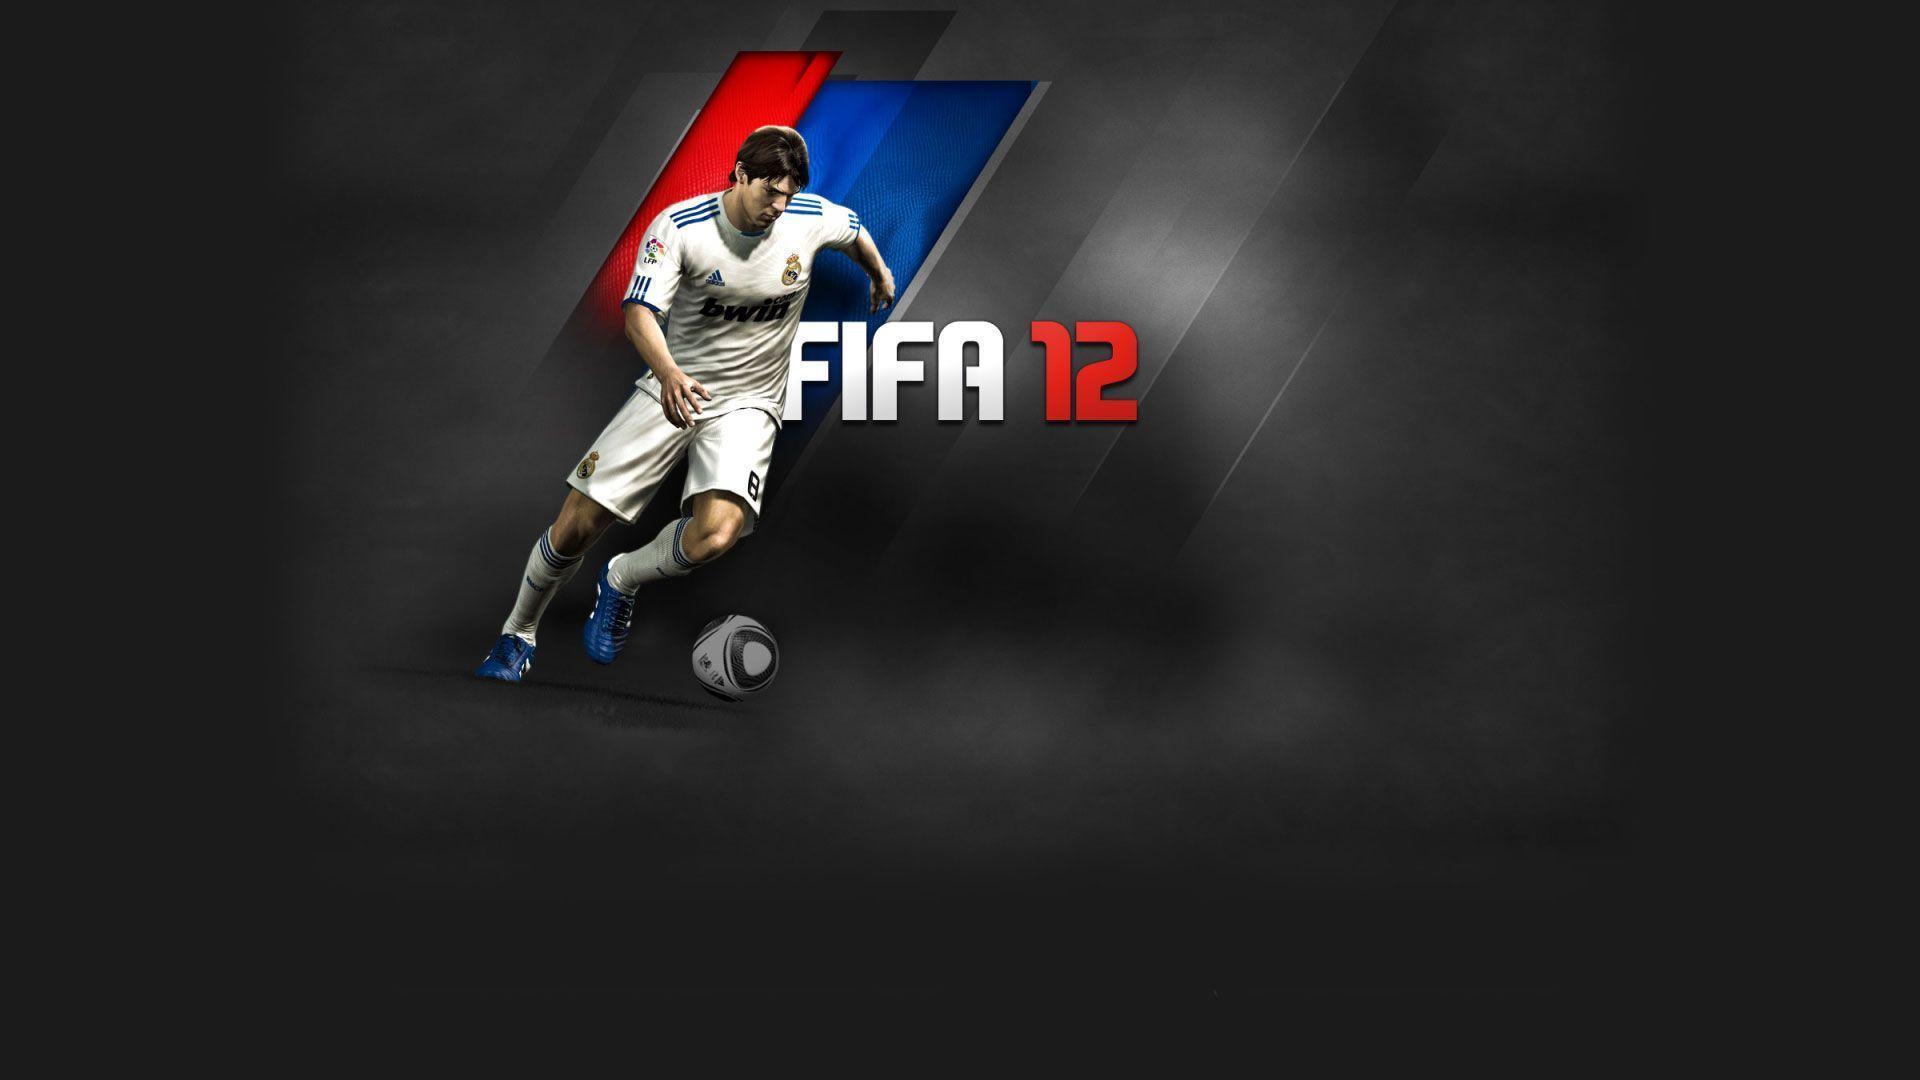 FIFA 12 Wallpapers